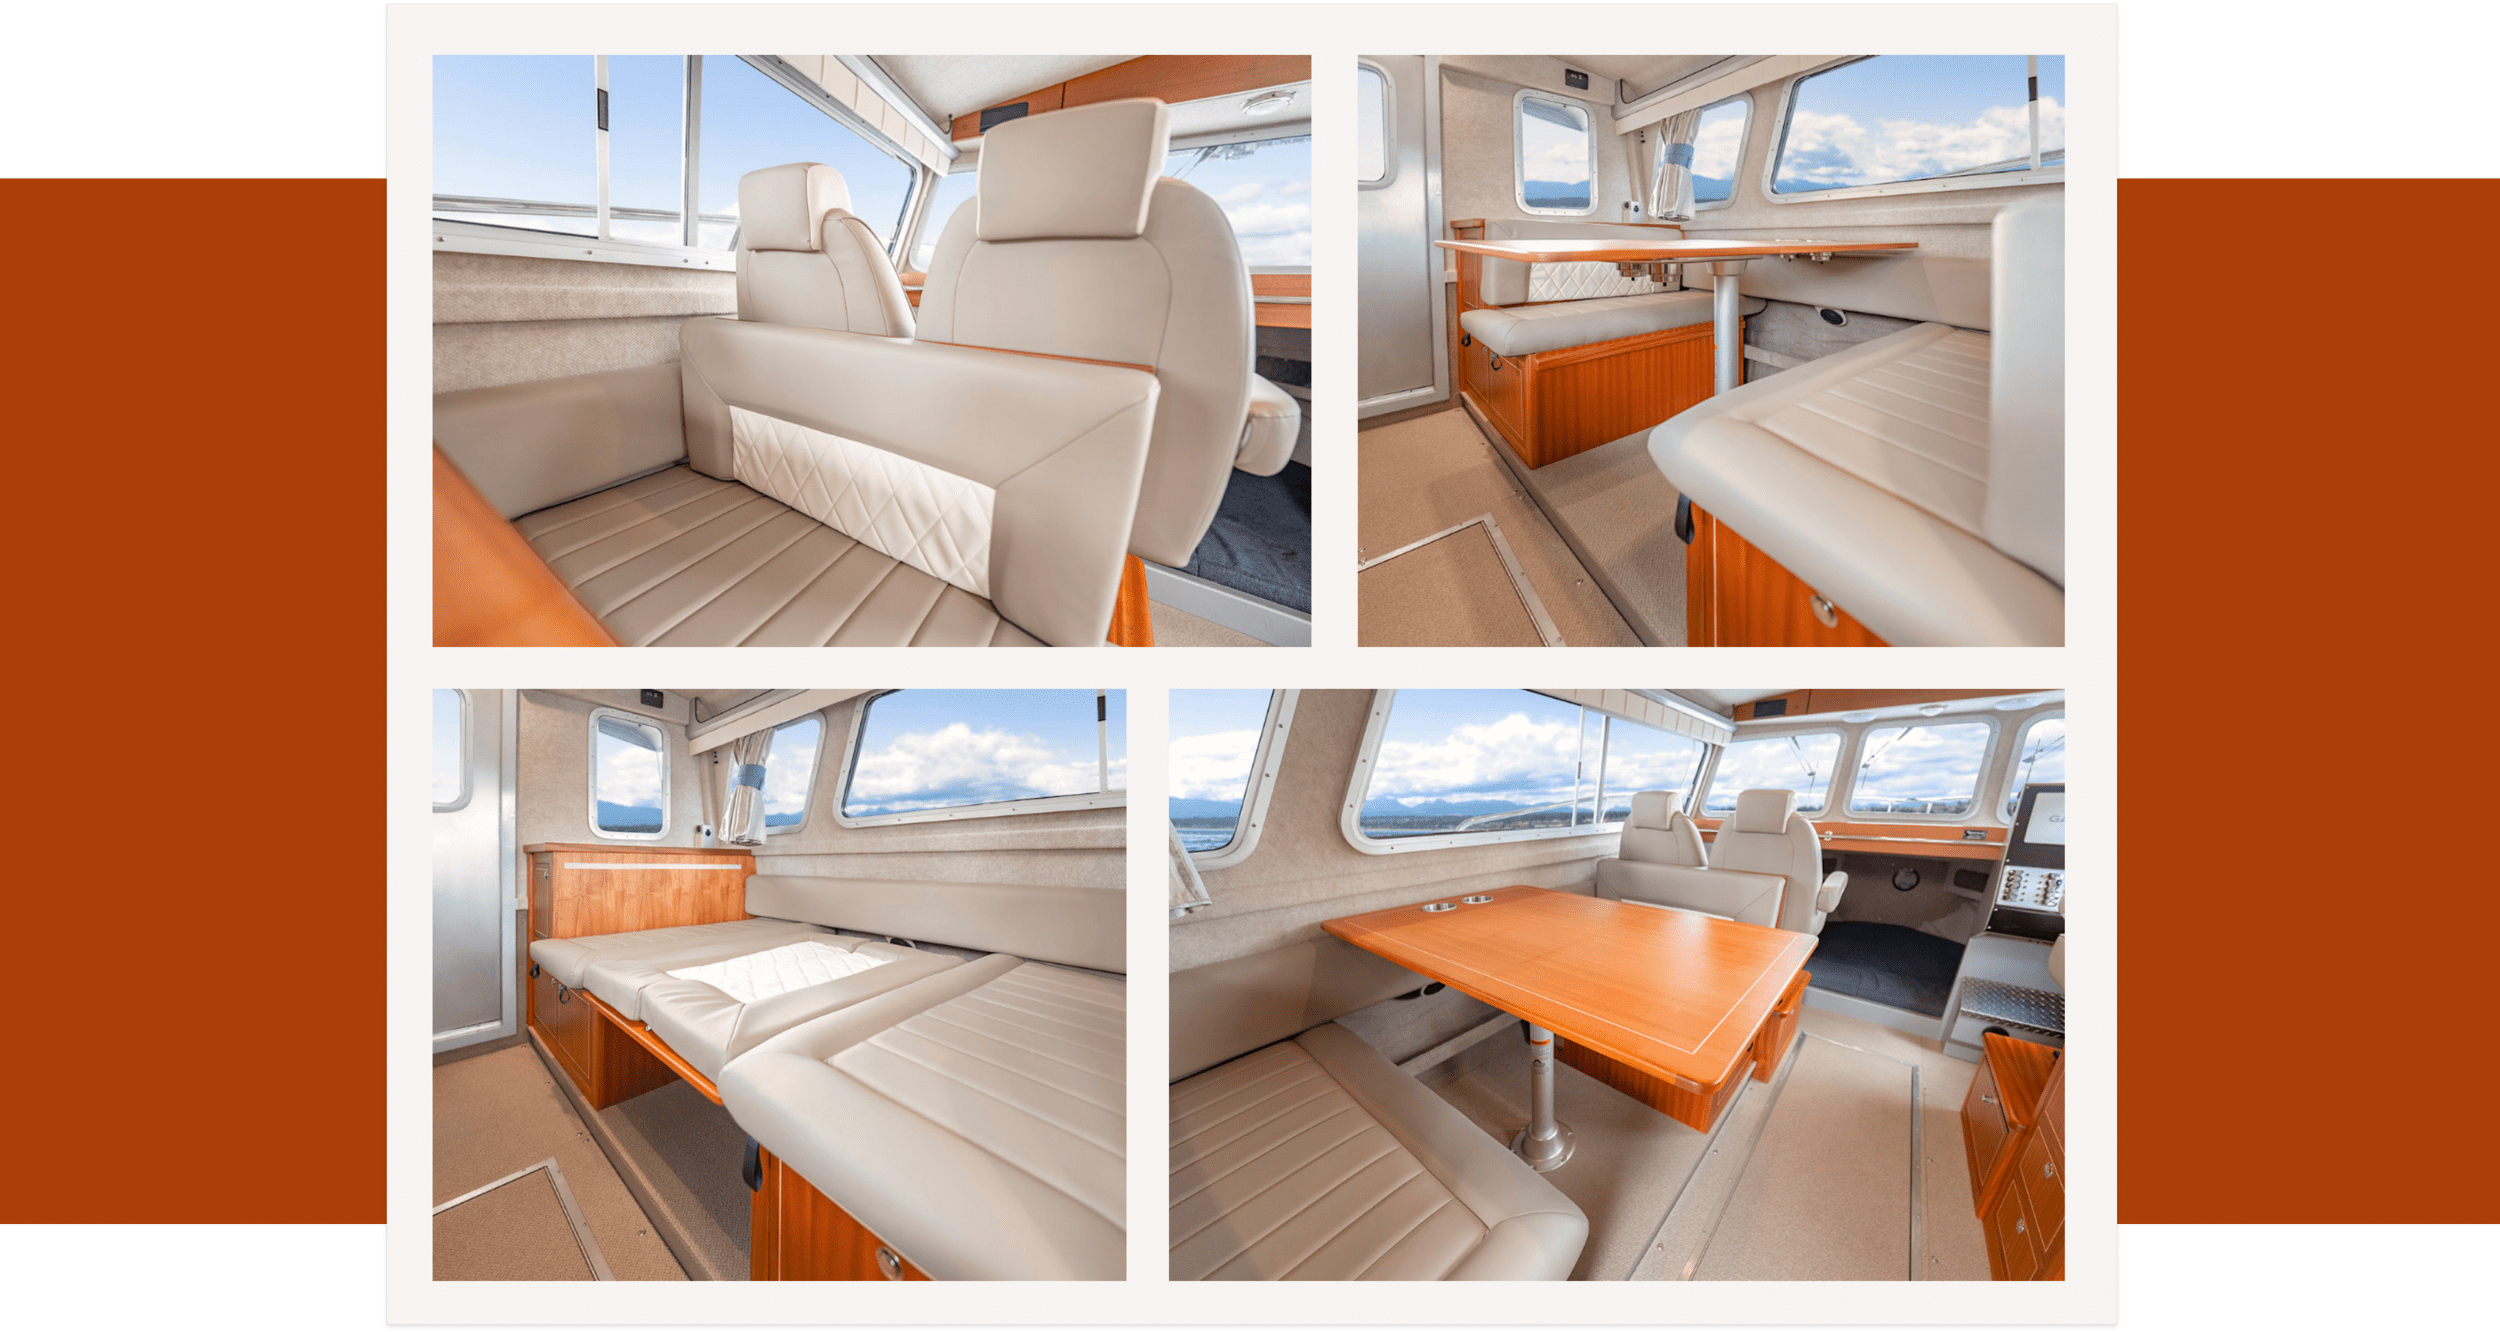 Four images in gallery style on two rows with different images of Kingfisher Boats interior in white from different angles with thick brown block in background